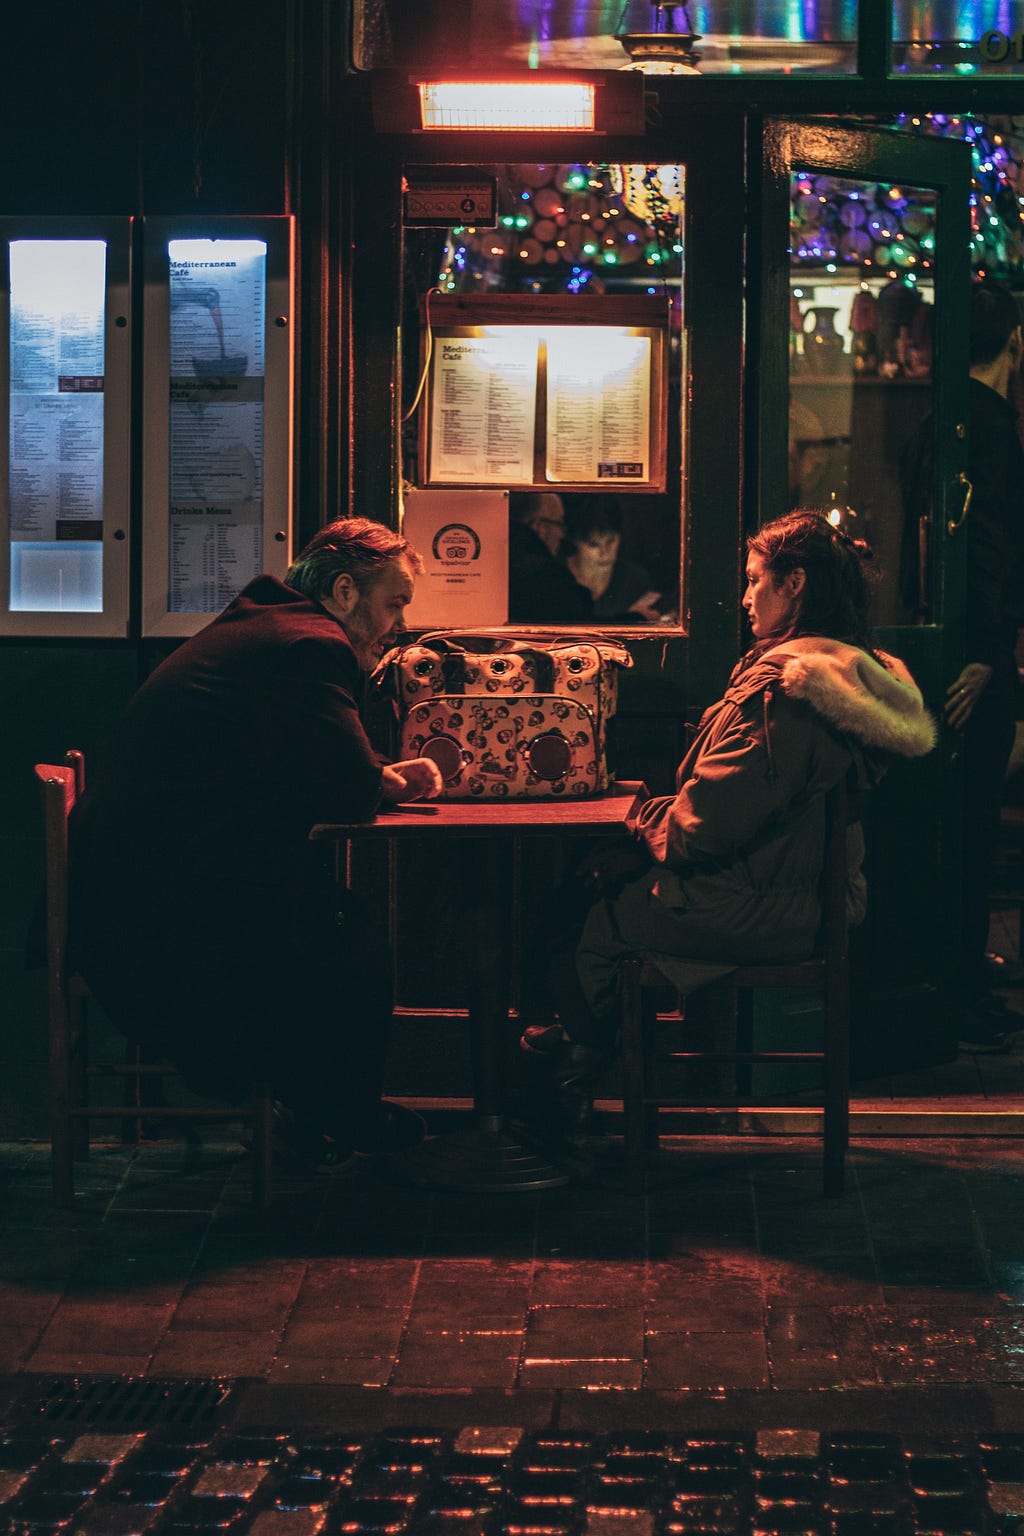 A man and woman sit alone at a table for two, dripping in orange light in an otherwise dark street scene. Inside the bar behind them, crowds celebrate… but these two are serious. They regard each other warily. Something has happened.